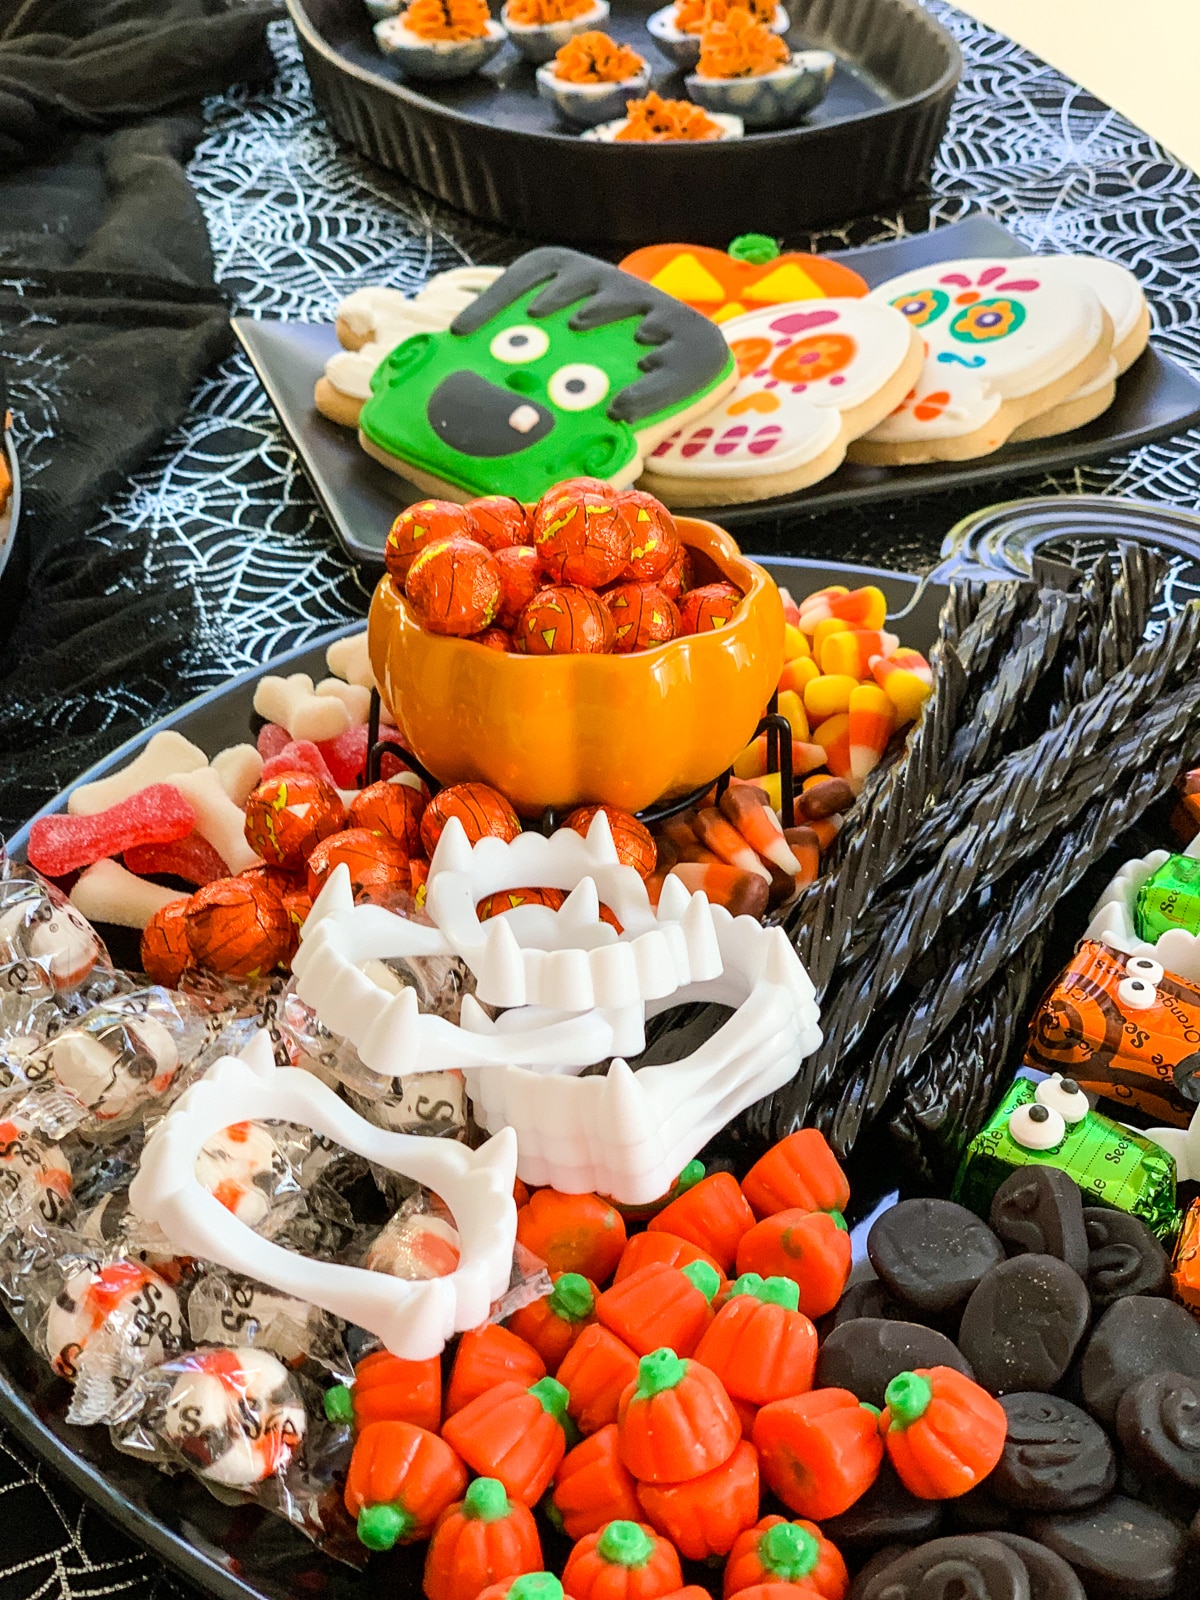 All kinds of sweets and candy on a Halloween candy board at a party. 